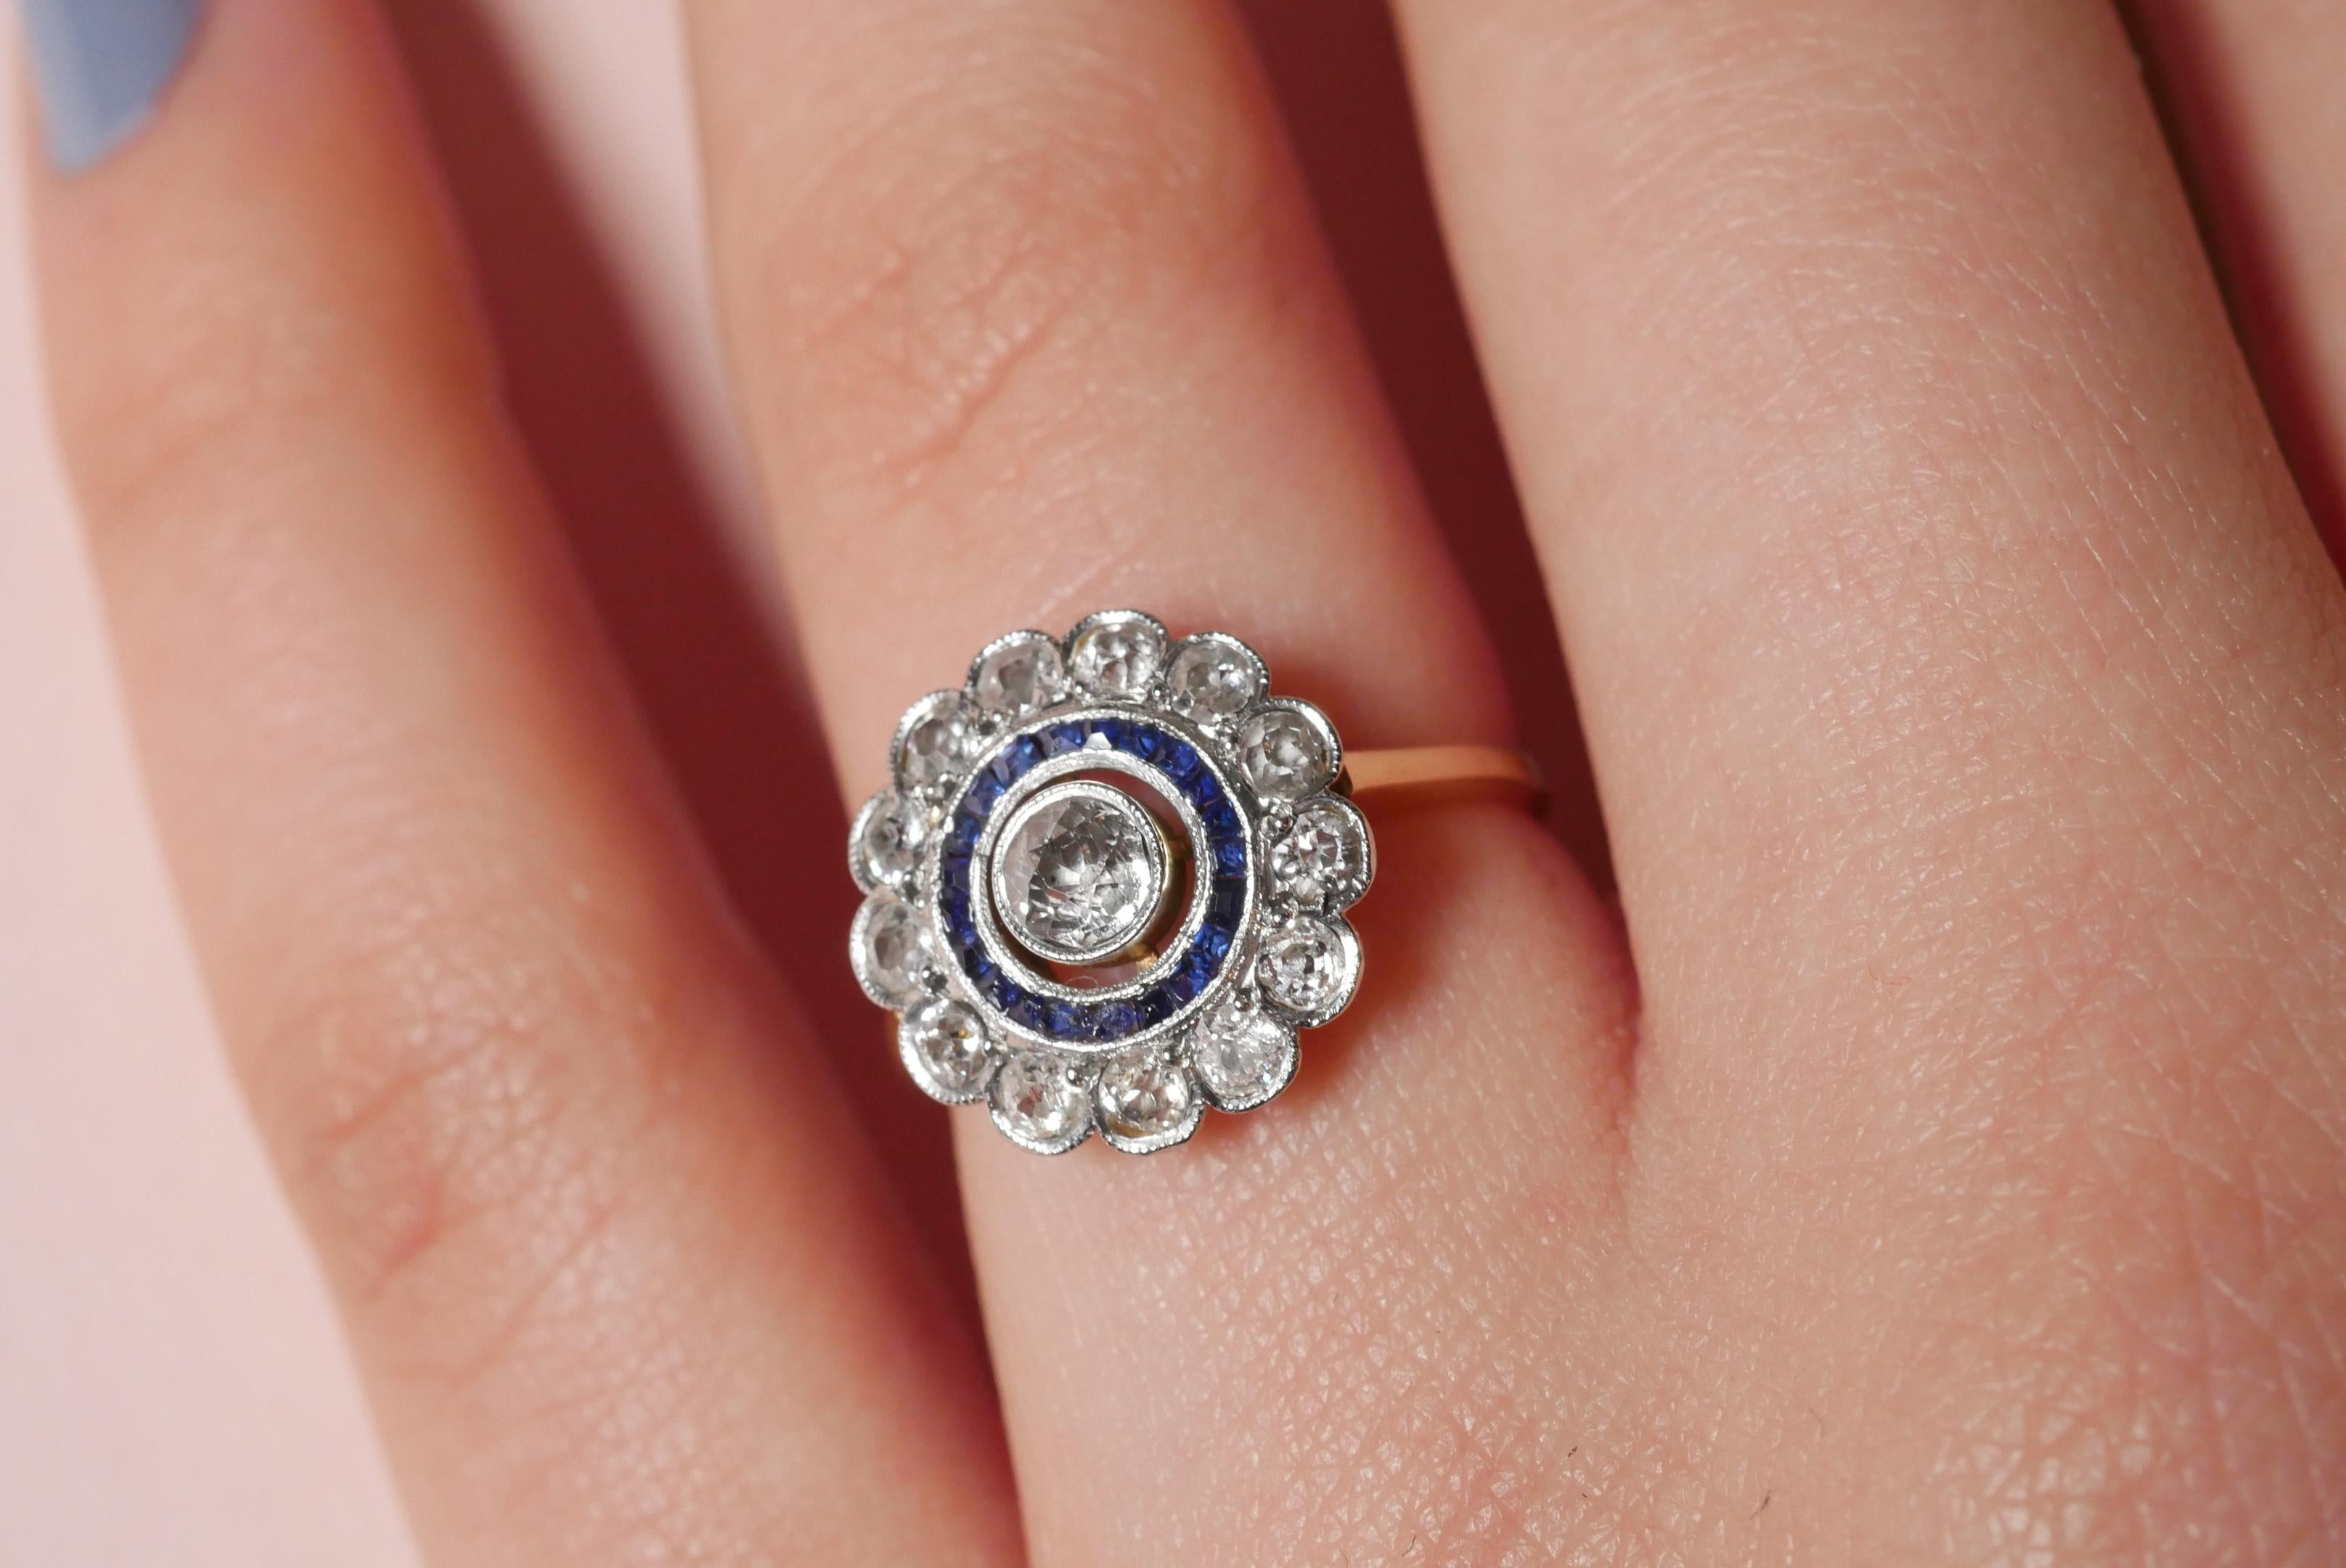 Handcrafted ring in yellow and white gold with a mesmerising old cut diamond in the centre, surrounded by a halo of blue sapphires and a halo of round diamonds in a beautiful open back setting.

Ring Size: UK - J 1/2, US - 5